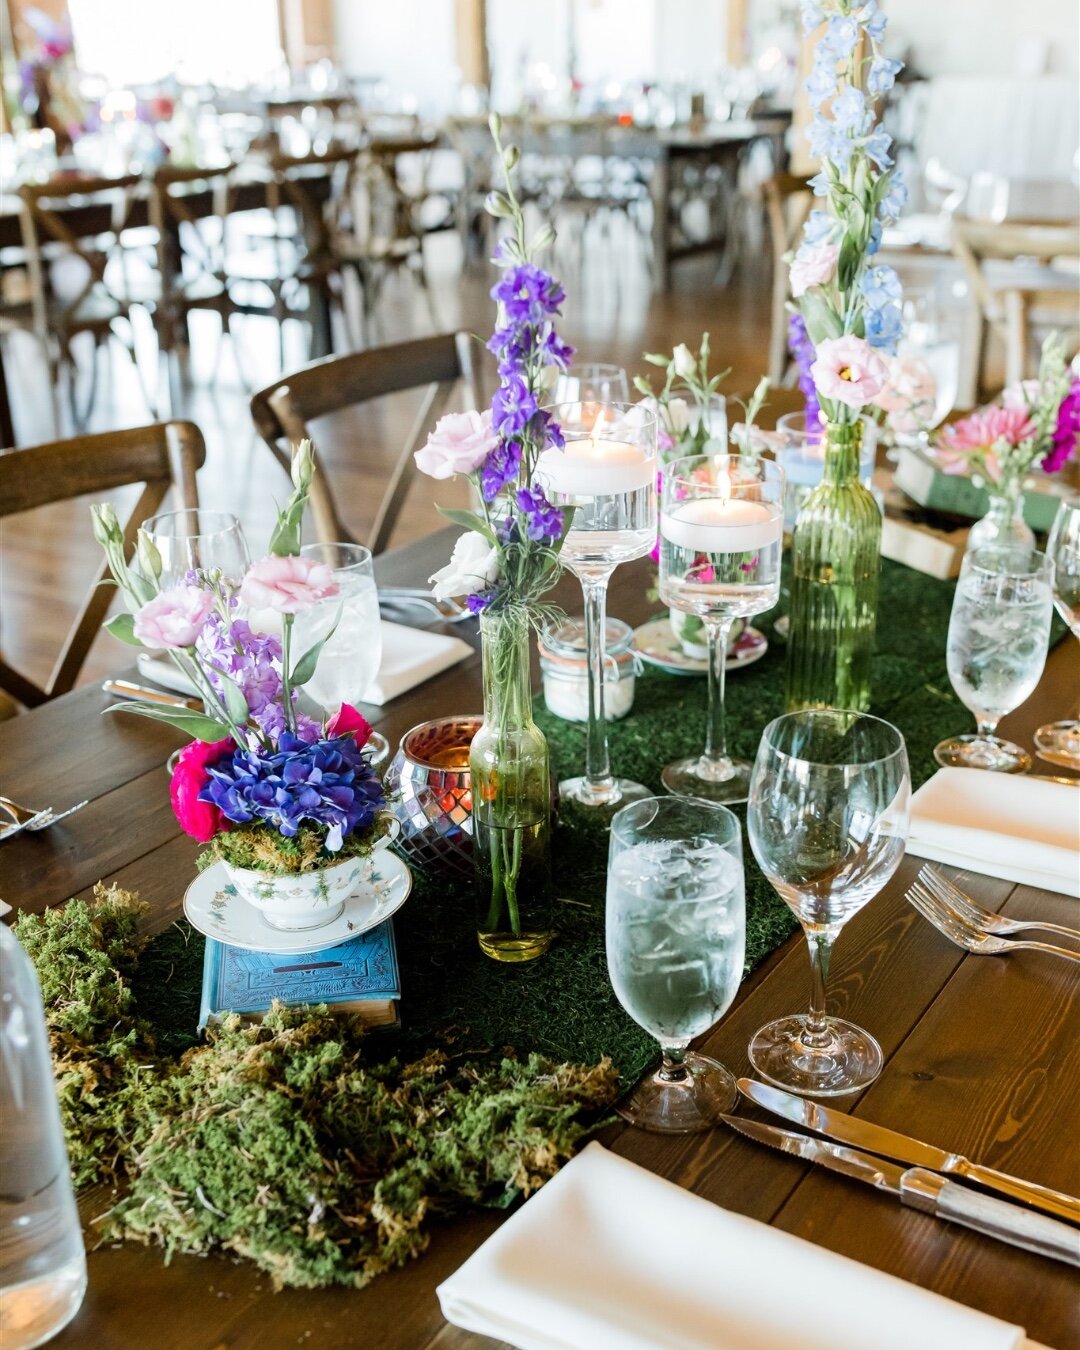 Bringing the garden vibes inside 😍🌷🌱 This garden tea party vibe with mossy textures and colorful florals is the perfect springtime wedding tablescape 💜

📸 @oncelikeaspark
.
.
.
#lacunaevents #lacunalofts #chicagoeventvenue #tablescapeinspiration